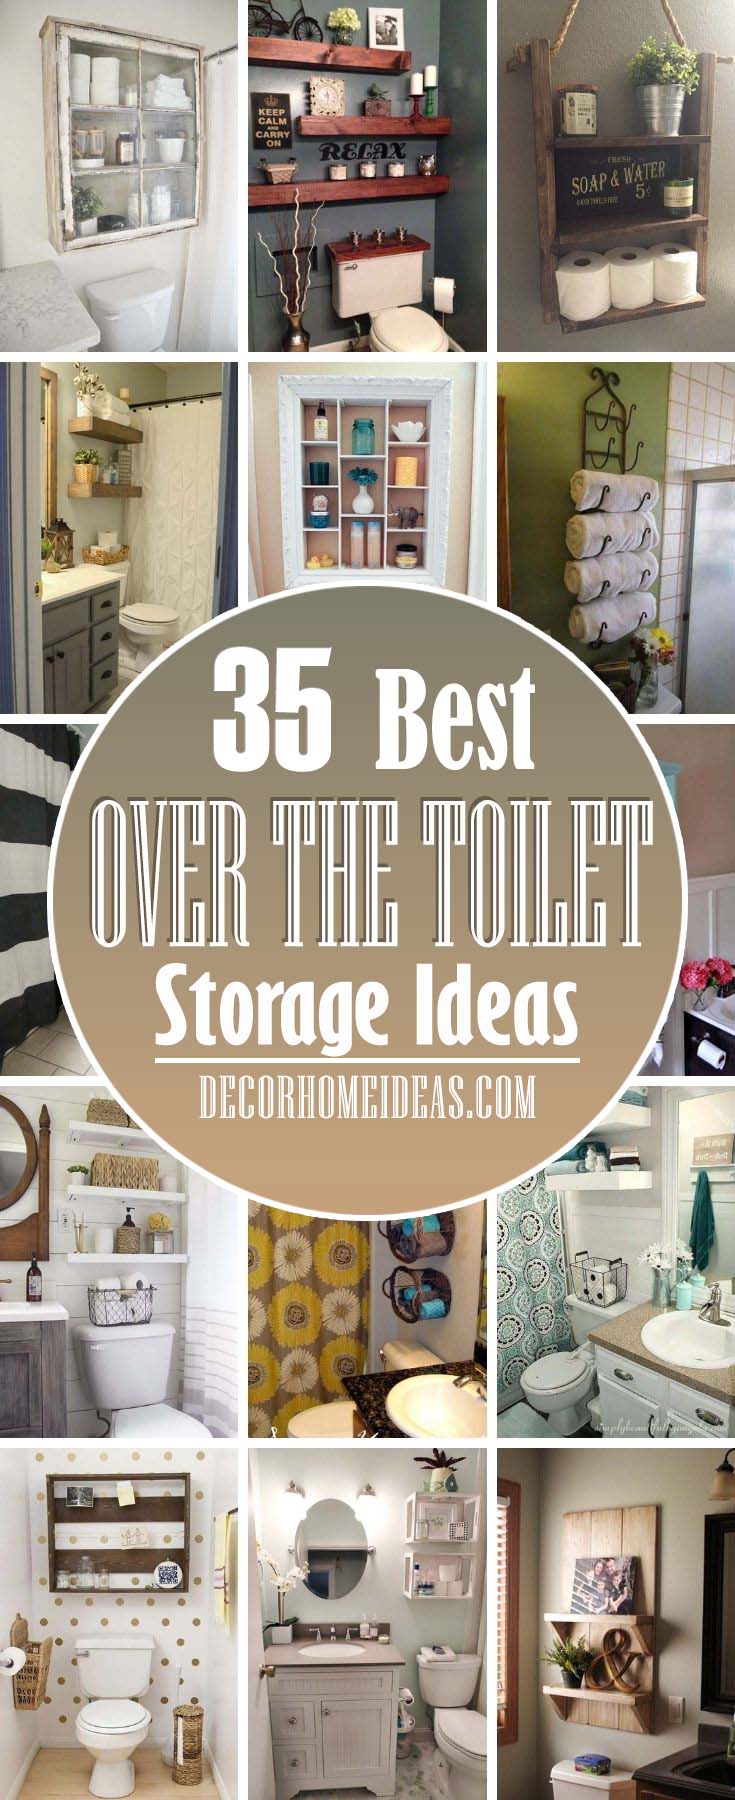 32 Smart Over The Toilet Storage Ideas To Help You Keep Everything In Place Decor Home